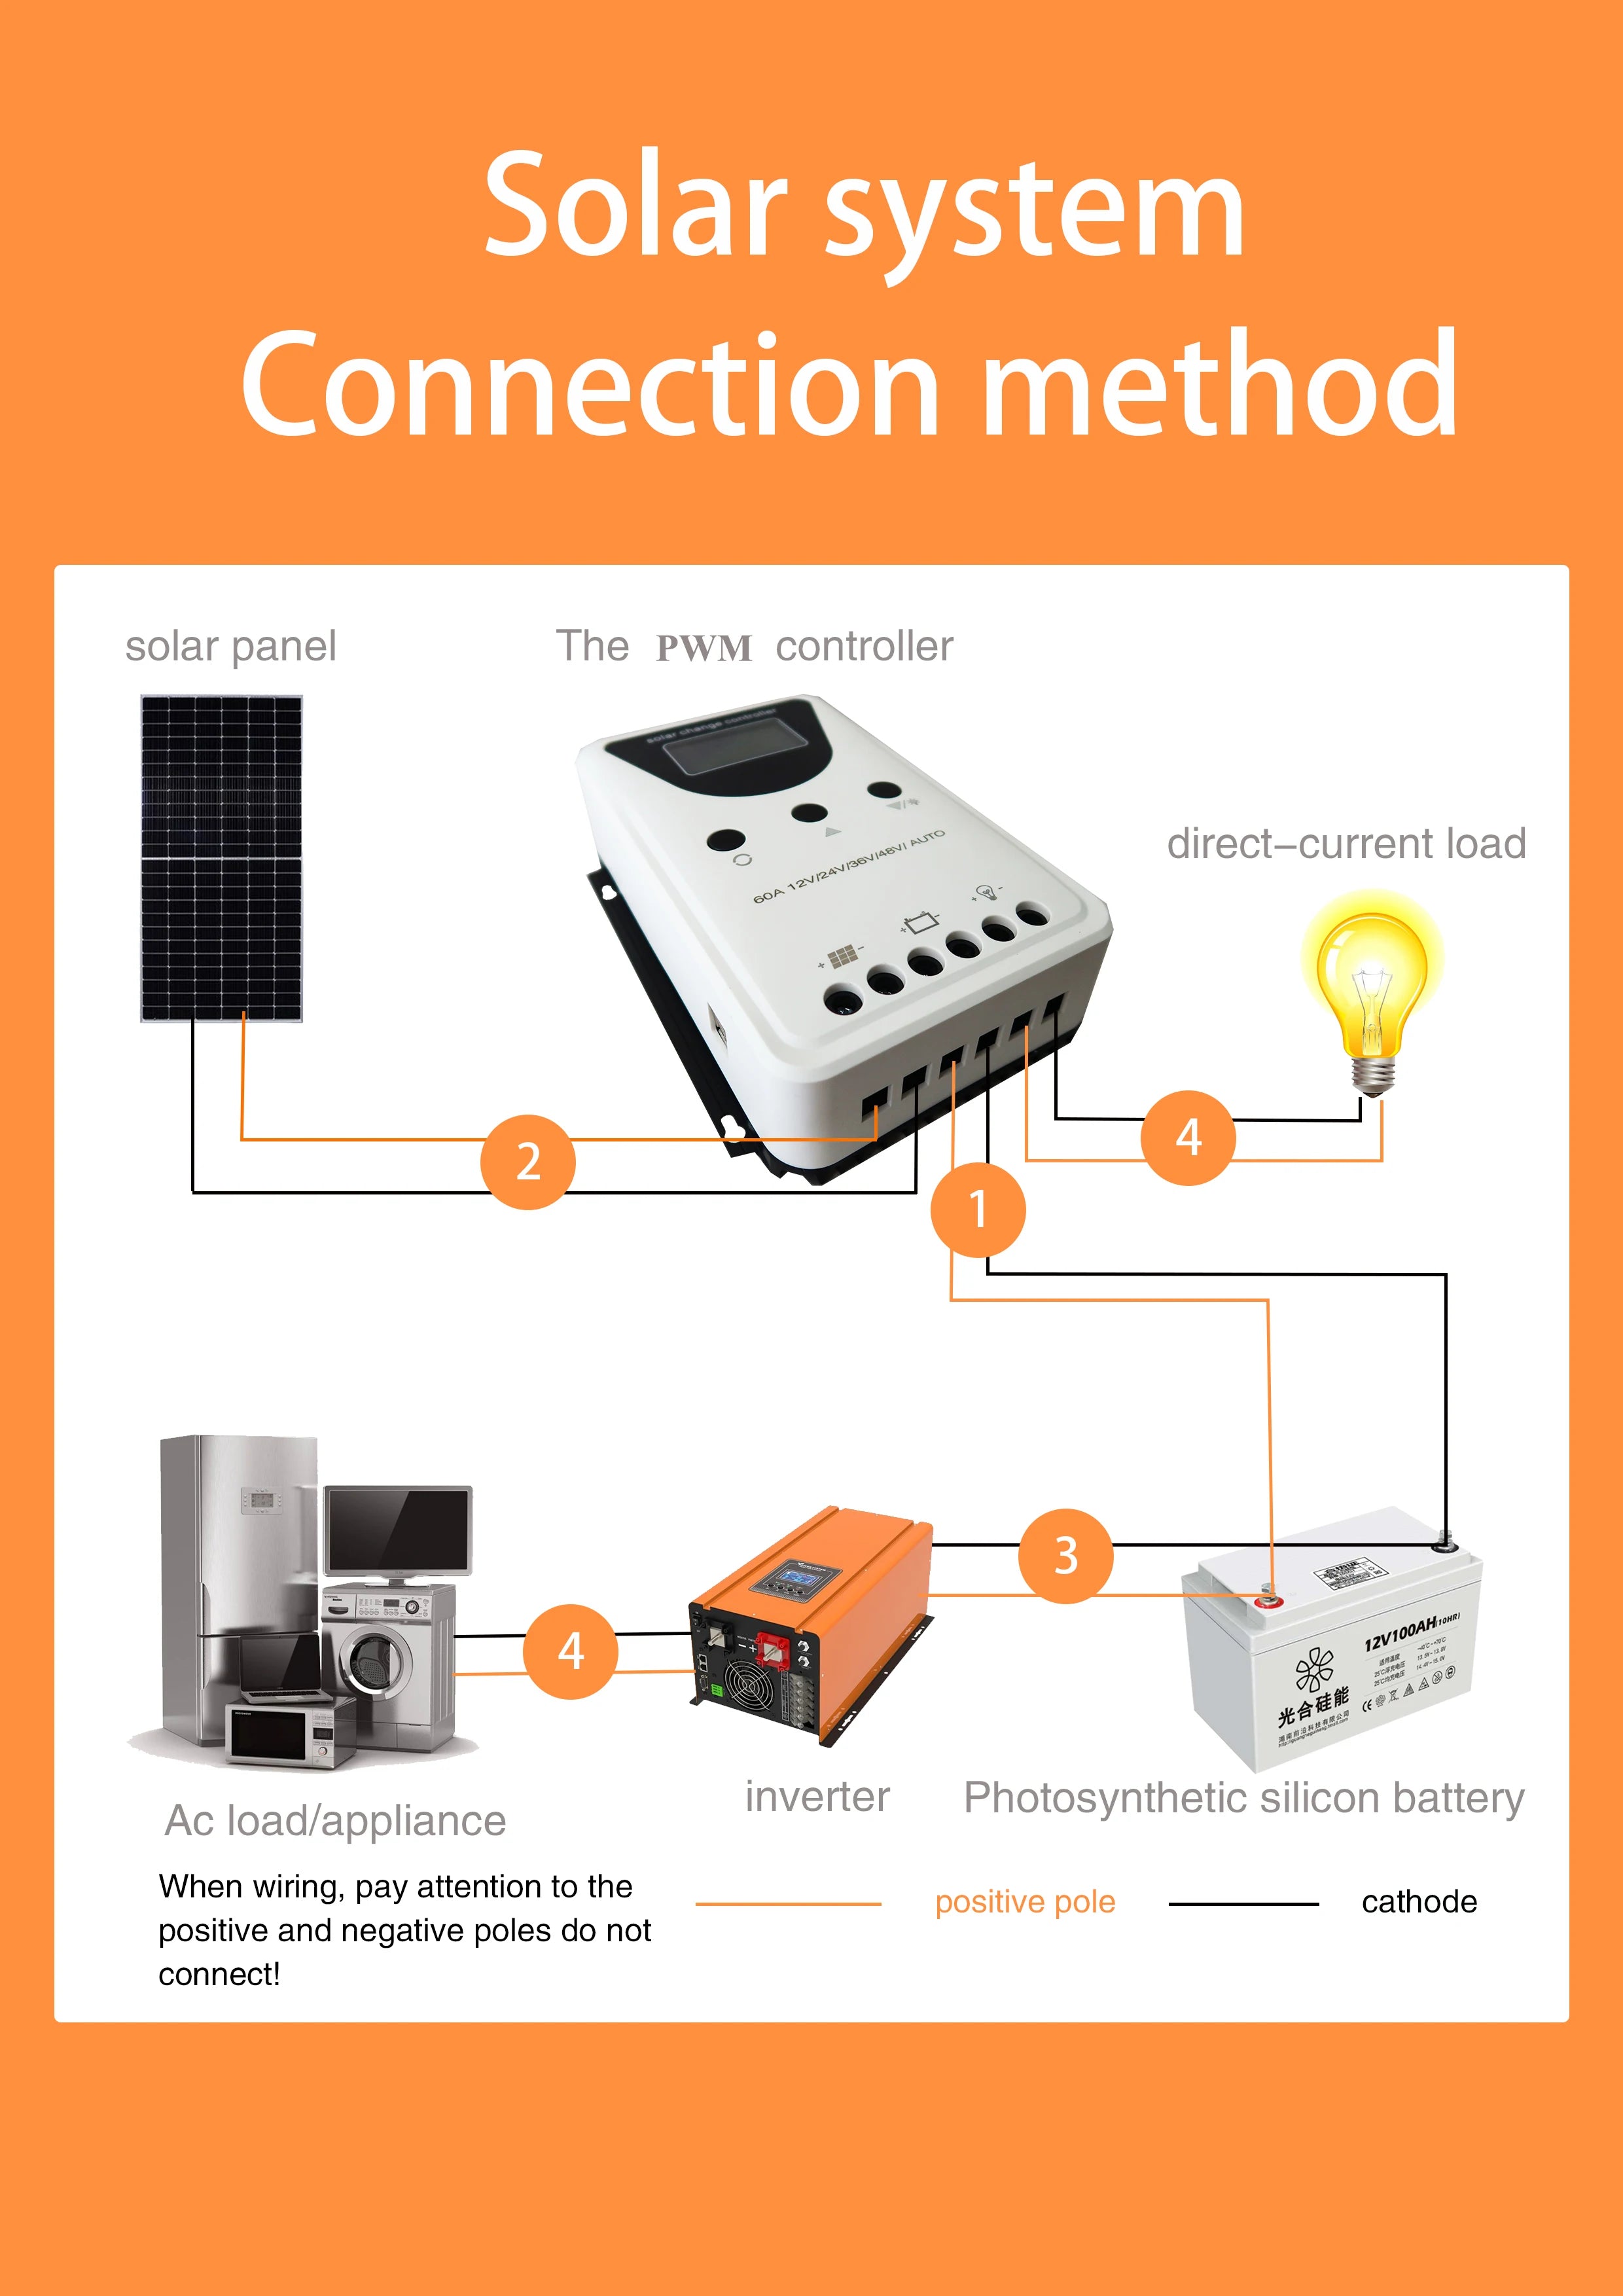 Solar panel system regulates DC power with PWM controller and DC load connection.